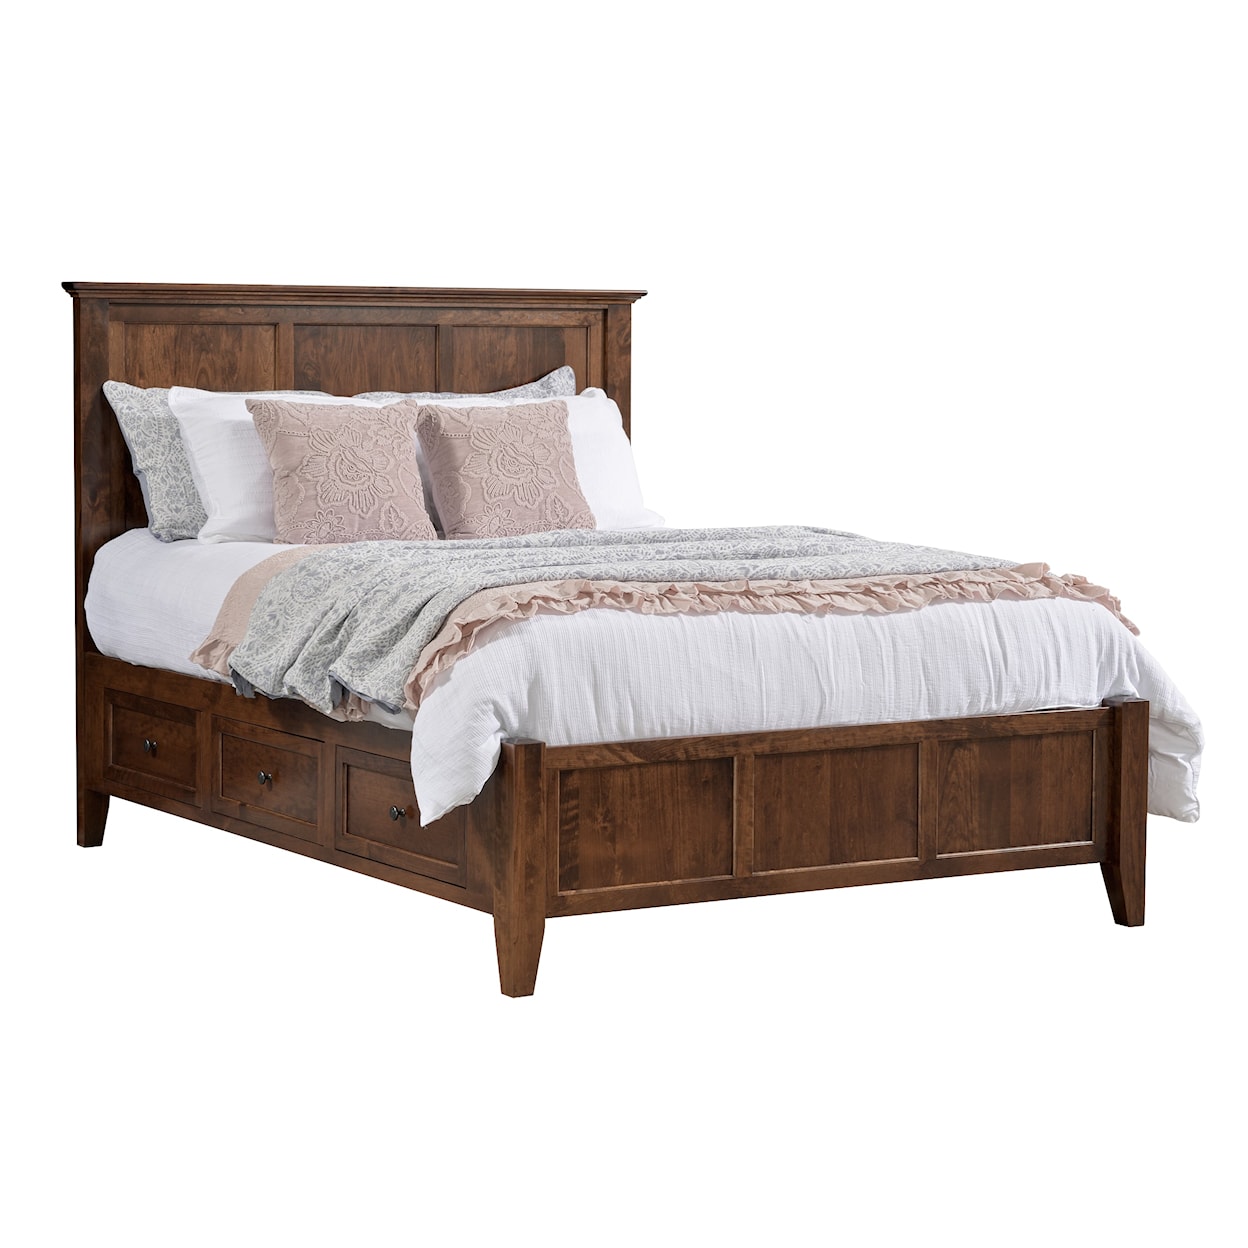 Millcraft Albany Queen PANEL BED W/ DRAWER UNITS RAISED 6''